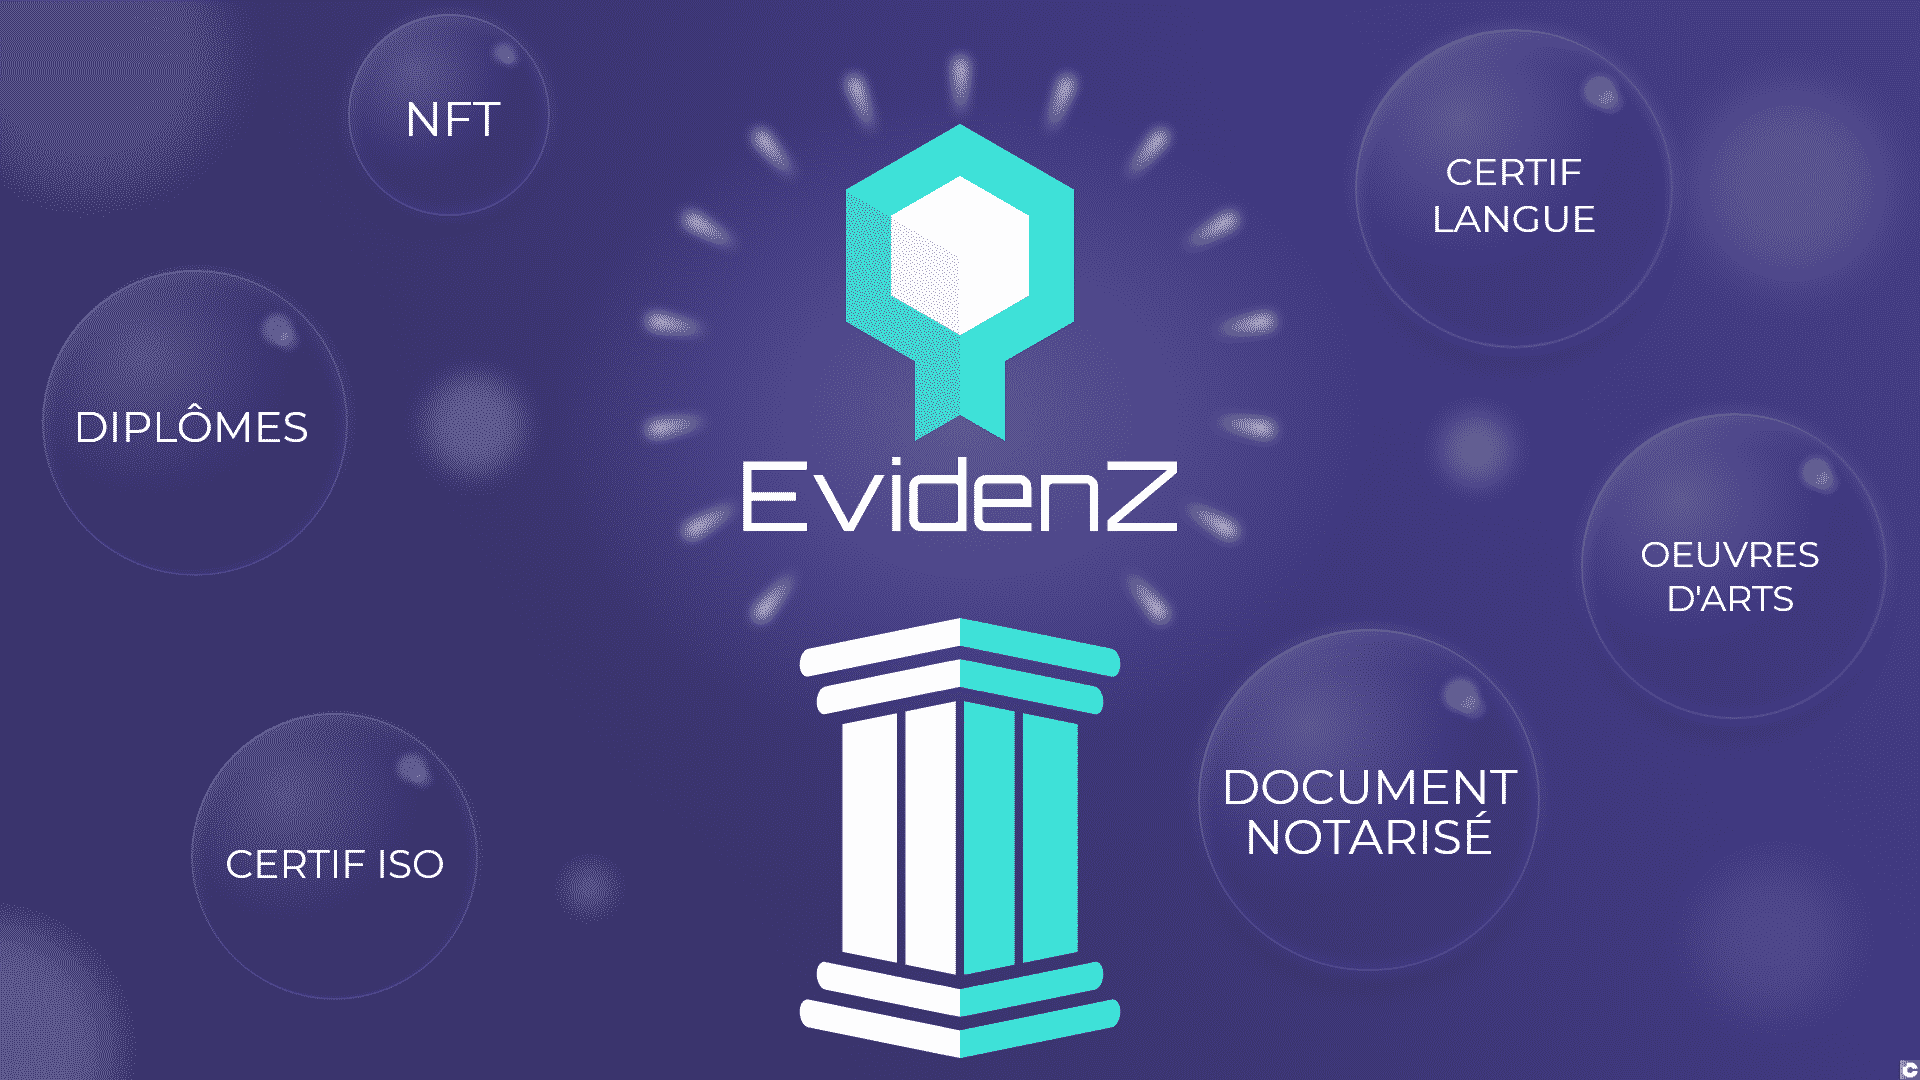 EvidenZ (BCDT): much more than a token, a solid financial model!